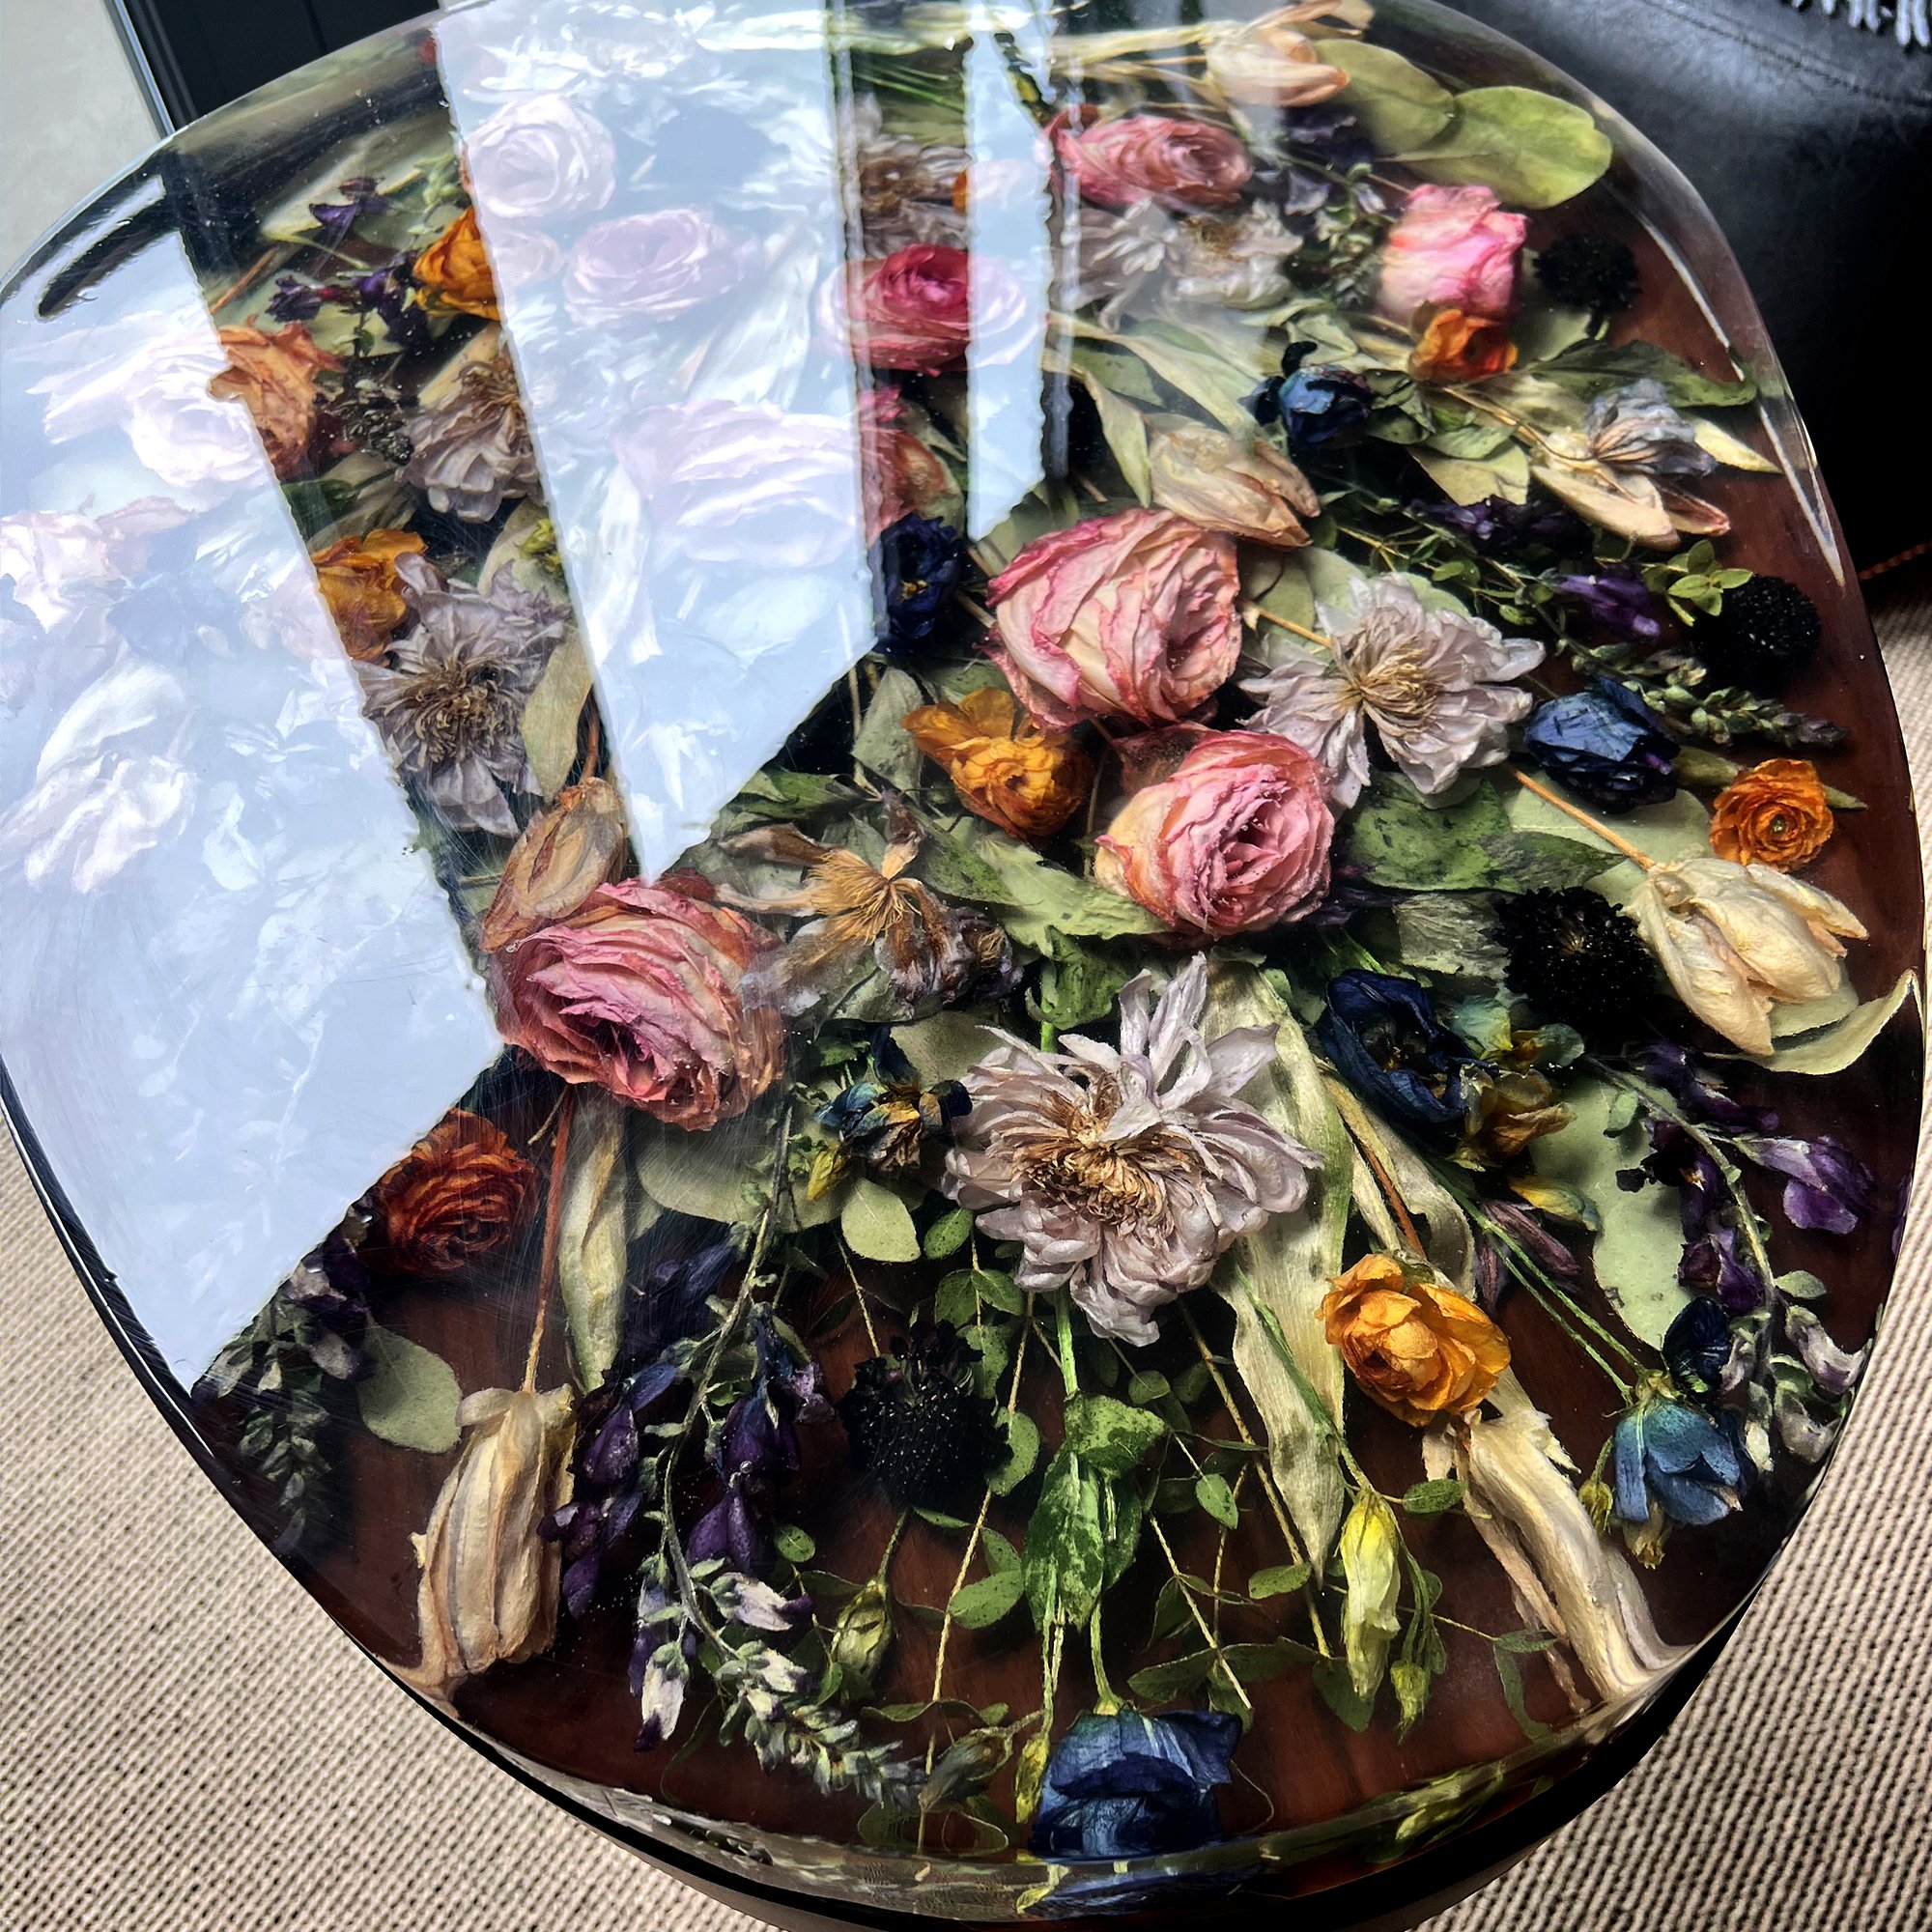 lucy-did-resin-bouquet-flower-kate-table-2.jpg